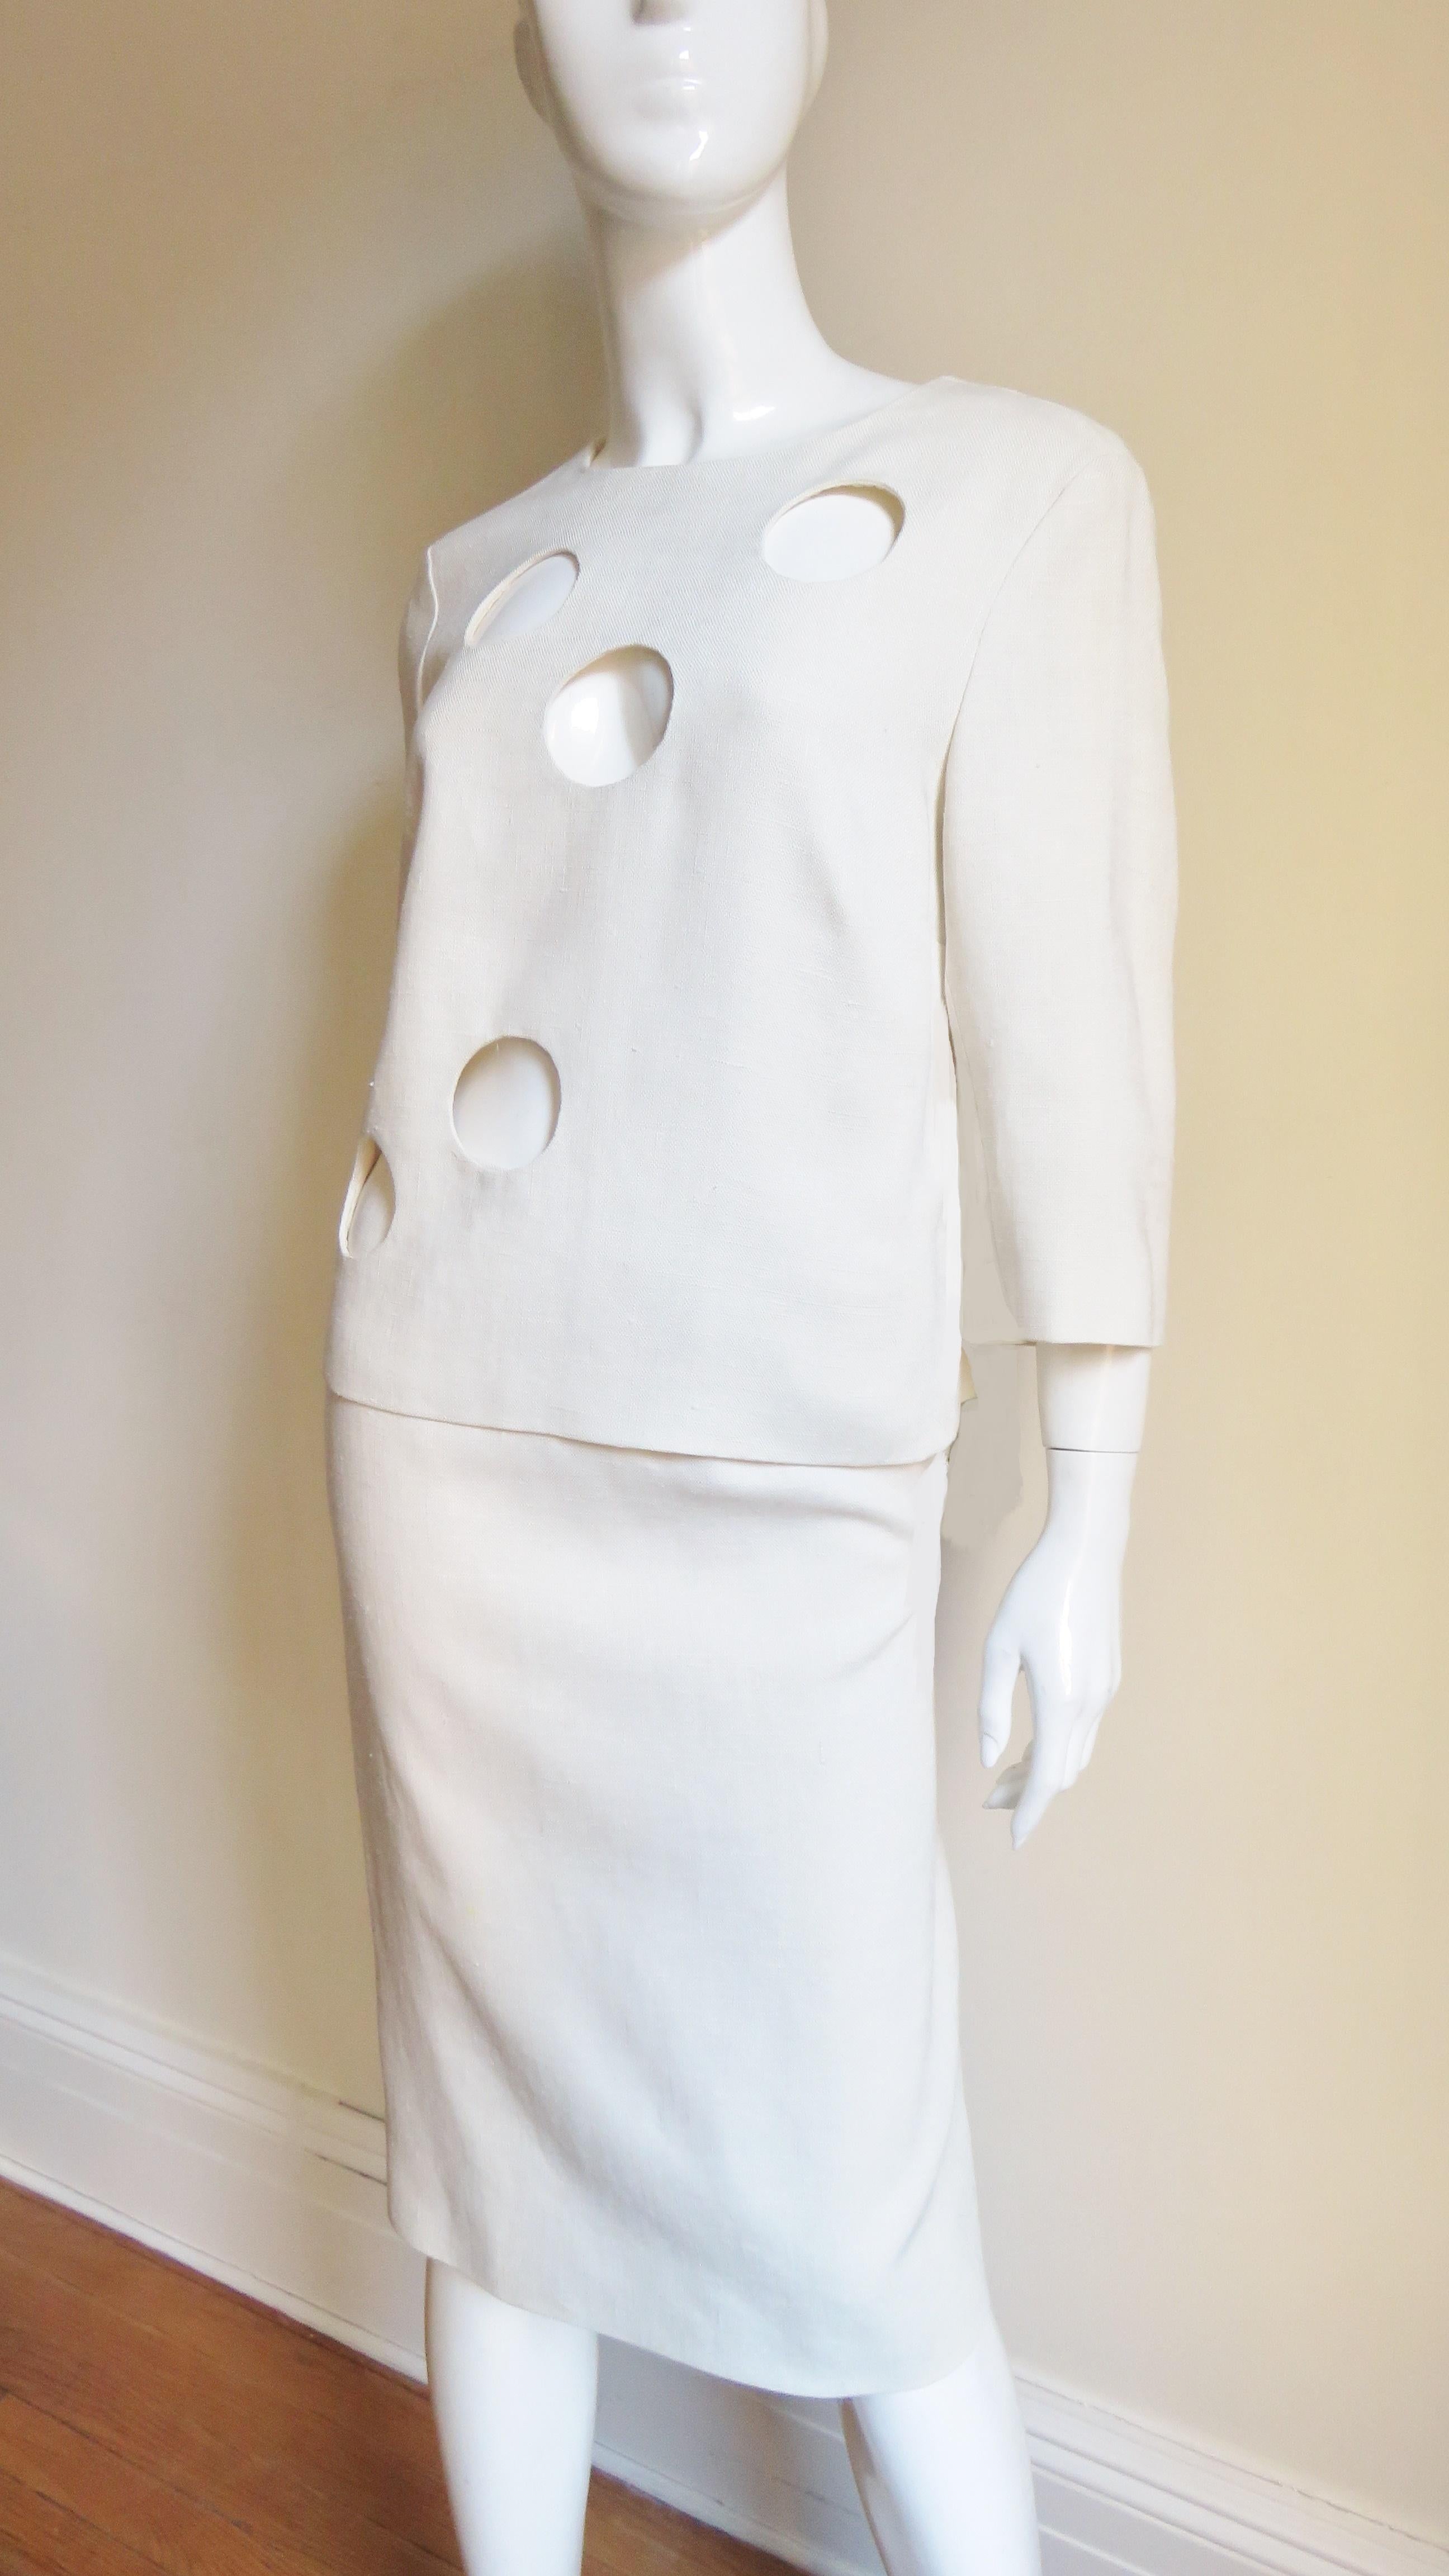 B H Wragge Linen Skirt and Top with Circle Cut outs 1964 In Good Condition For Sale In Water Mill, NY